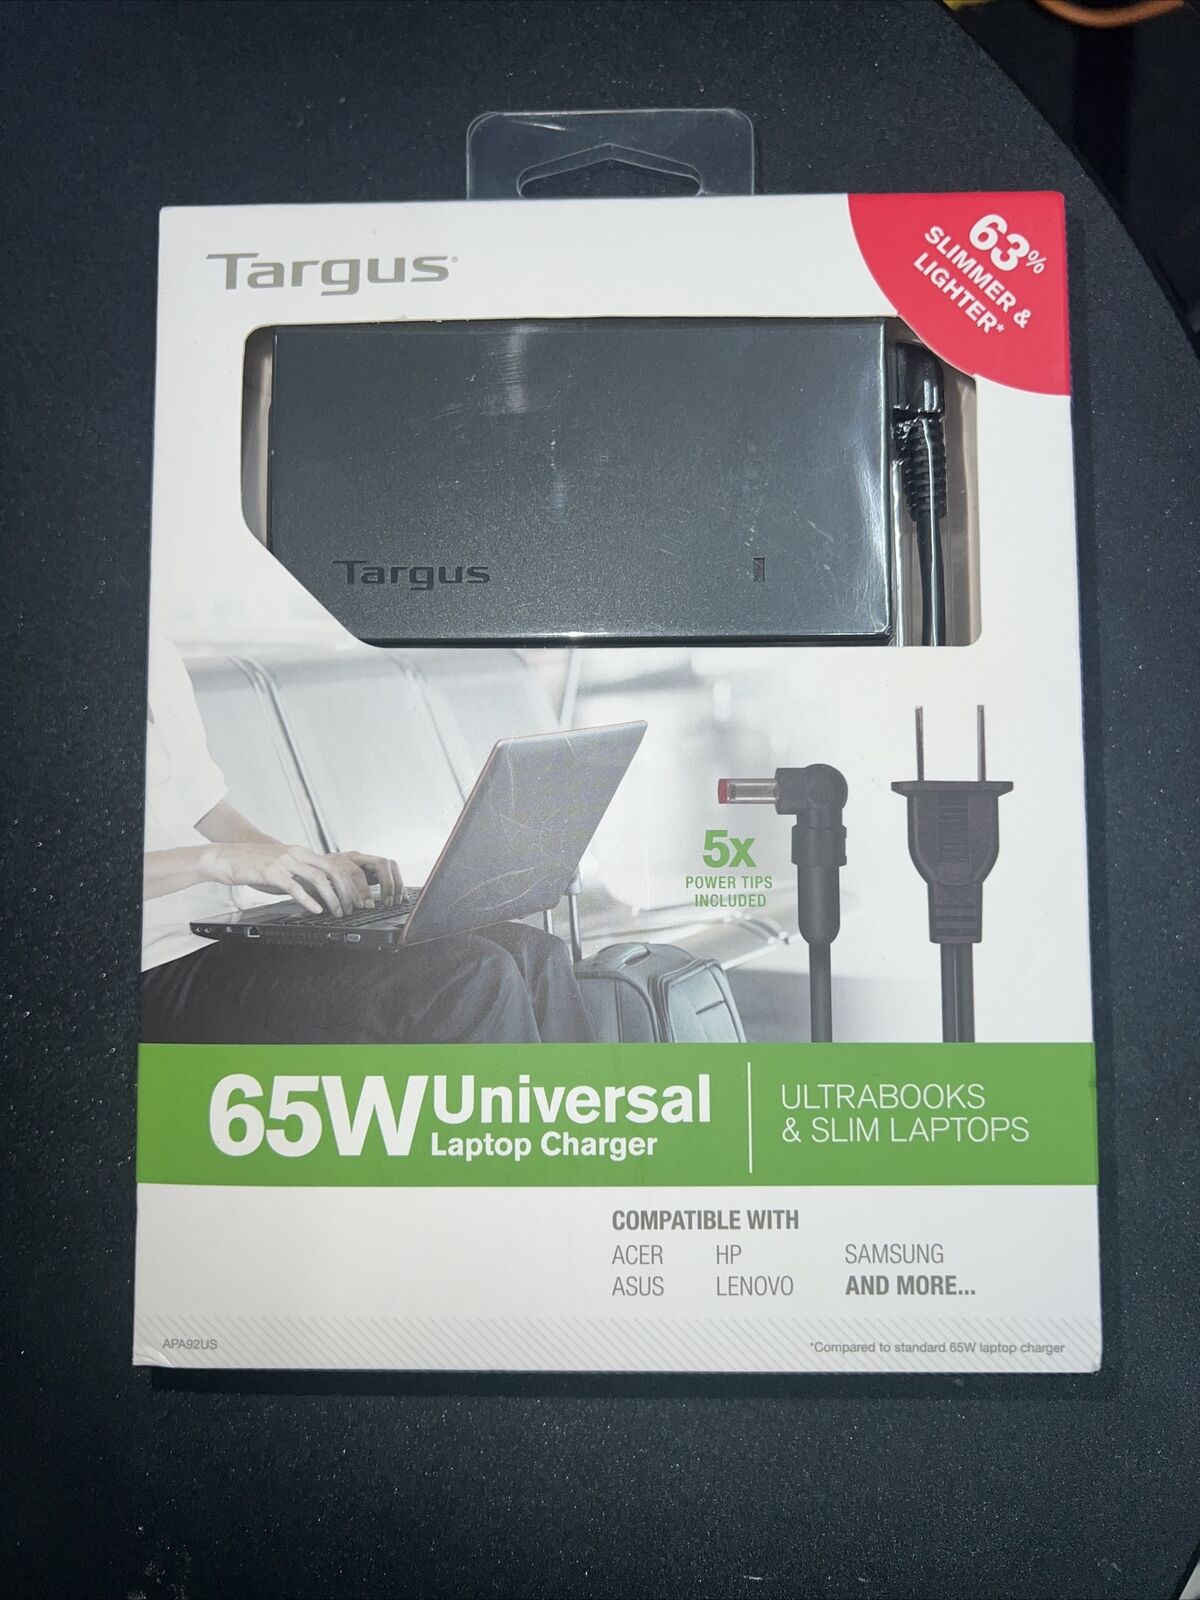 Targus 65W Universal Laptop Charger with 5 Interchangeable Power Tips APA92US@